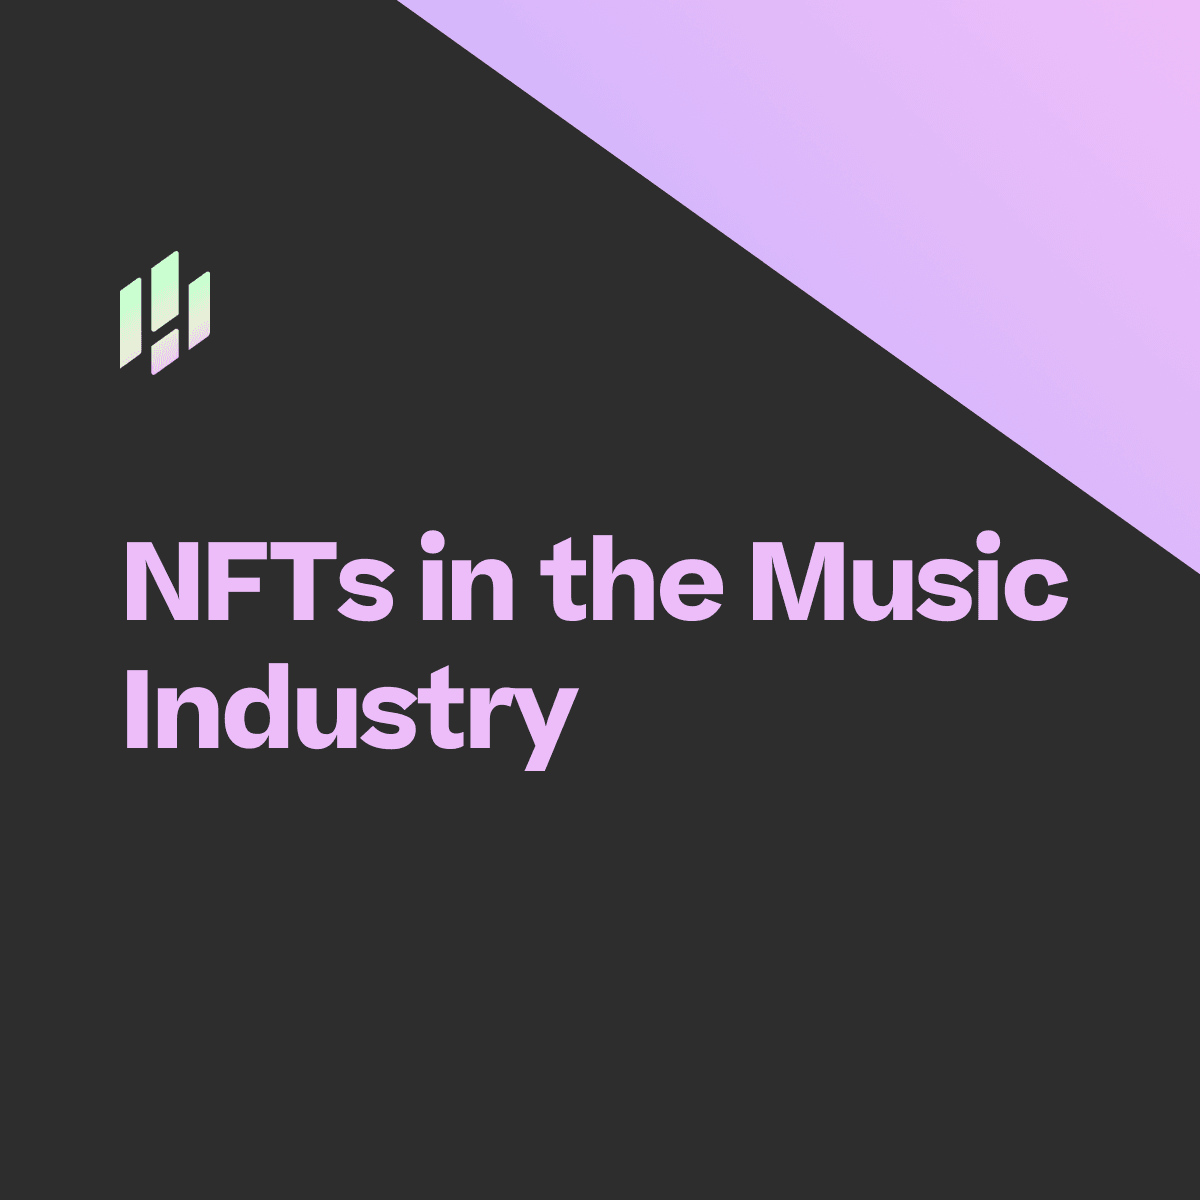 NFTs in the Music Industry